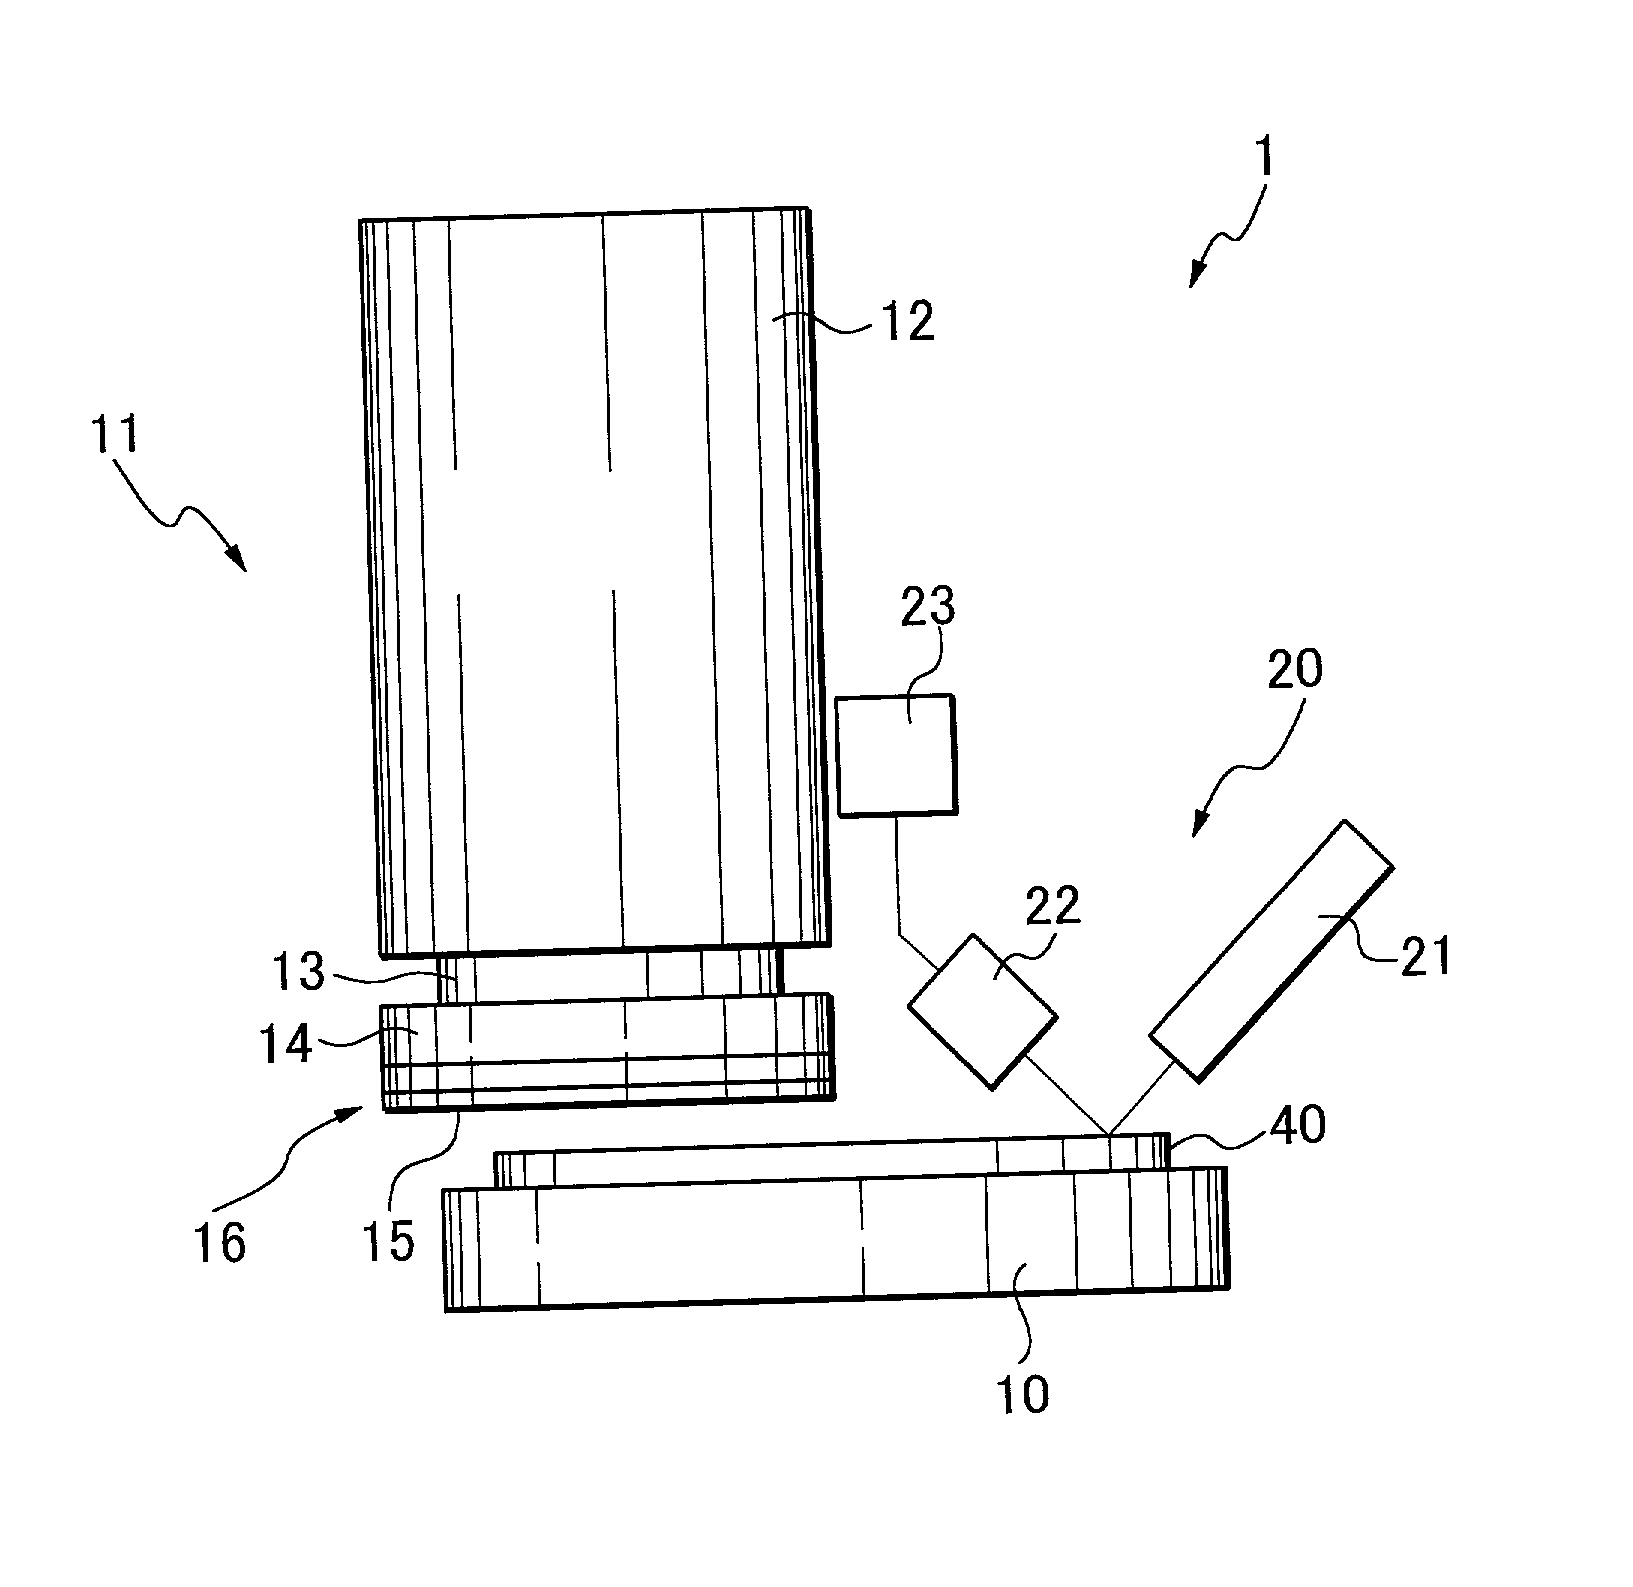 Non-contact thickness-measuring device